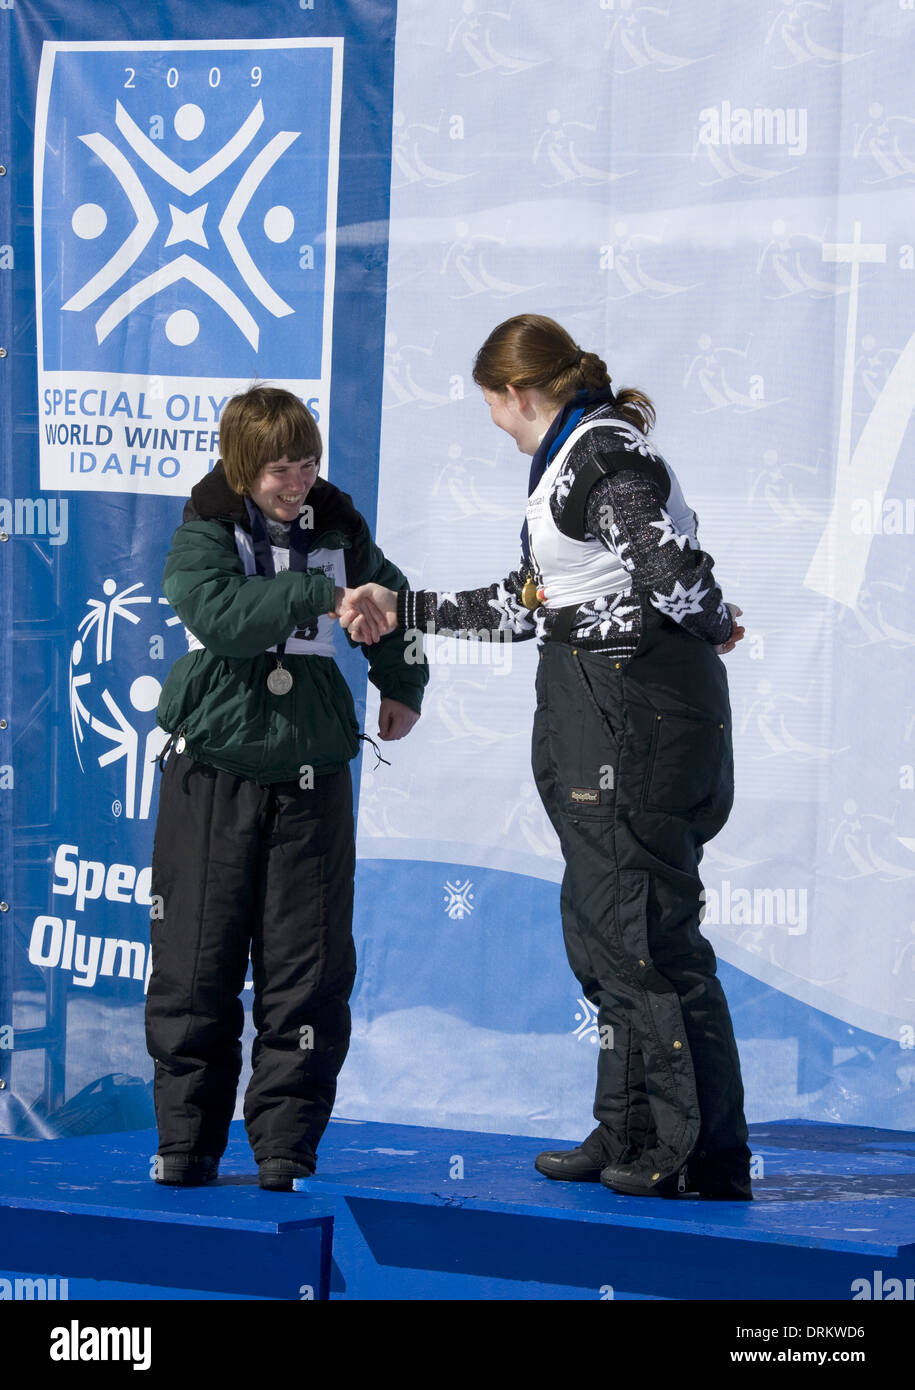 Special Olympics Invitational Winter Games Idaho 2008, winners of Alpine skiing events receiving award medals Stock Photo